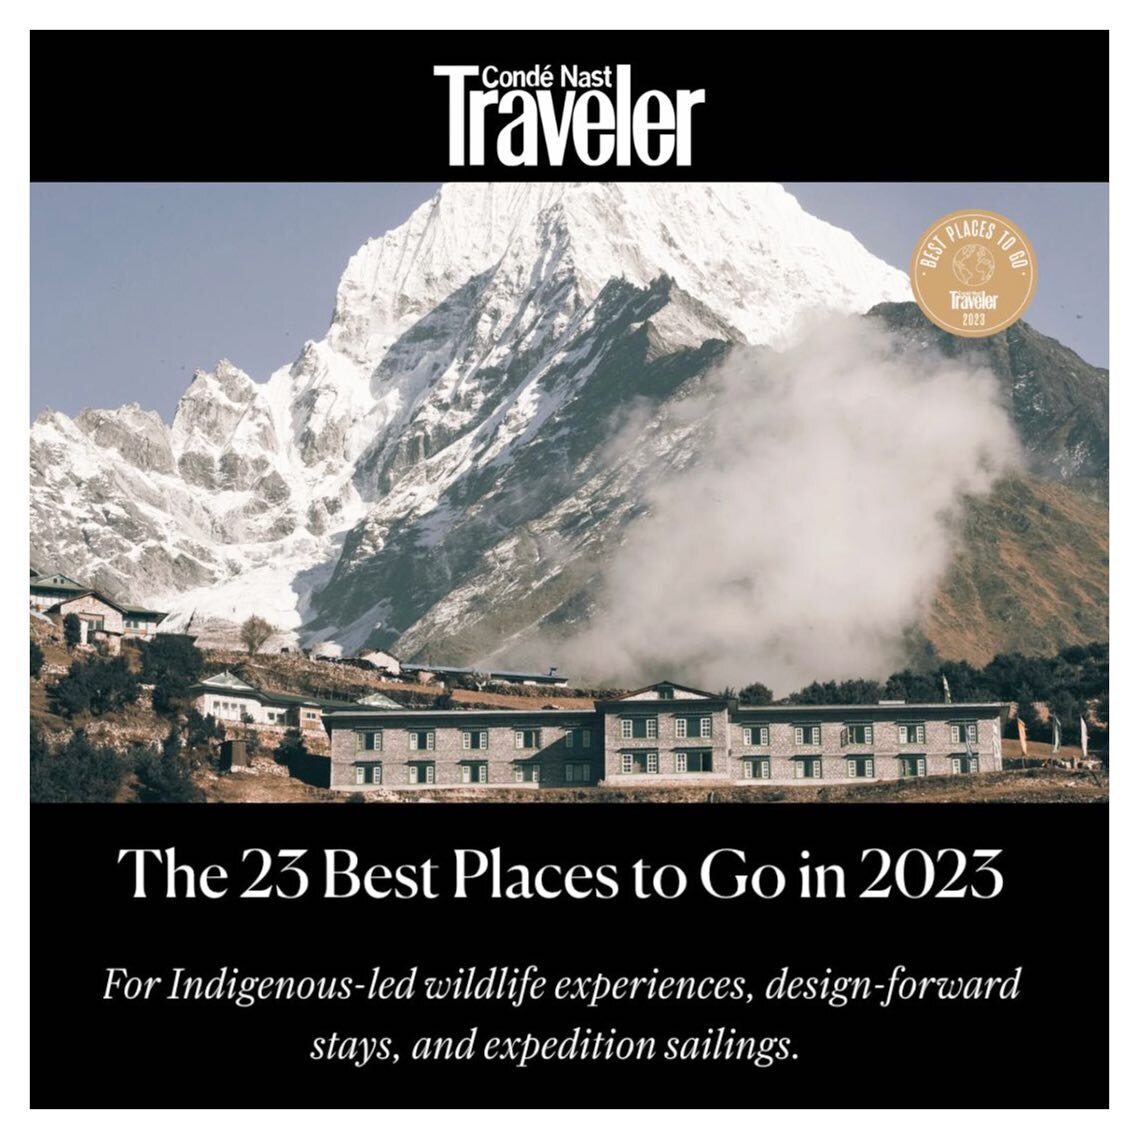 Cond&eacute; Nast Traveler&rsquo;s 2023 Where to Go list is out! I&rsquo;m grateful I got to write about all the amazing new and forthcoming projects arriving to Mexico&rsquo;s Yucat&aacute;n Peninsula, including @bocadeagua, @casachable, the Esencia